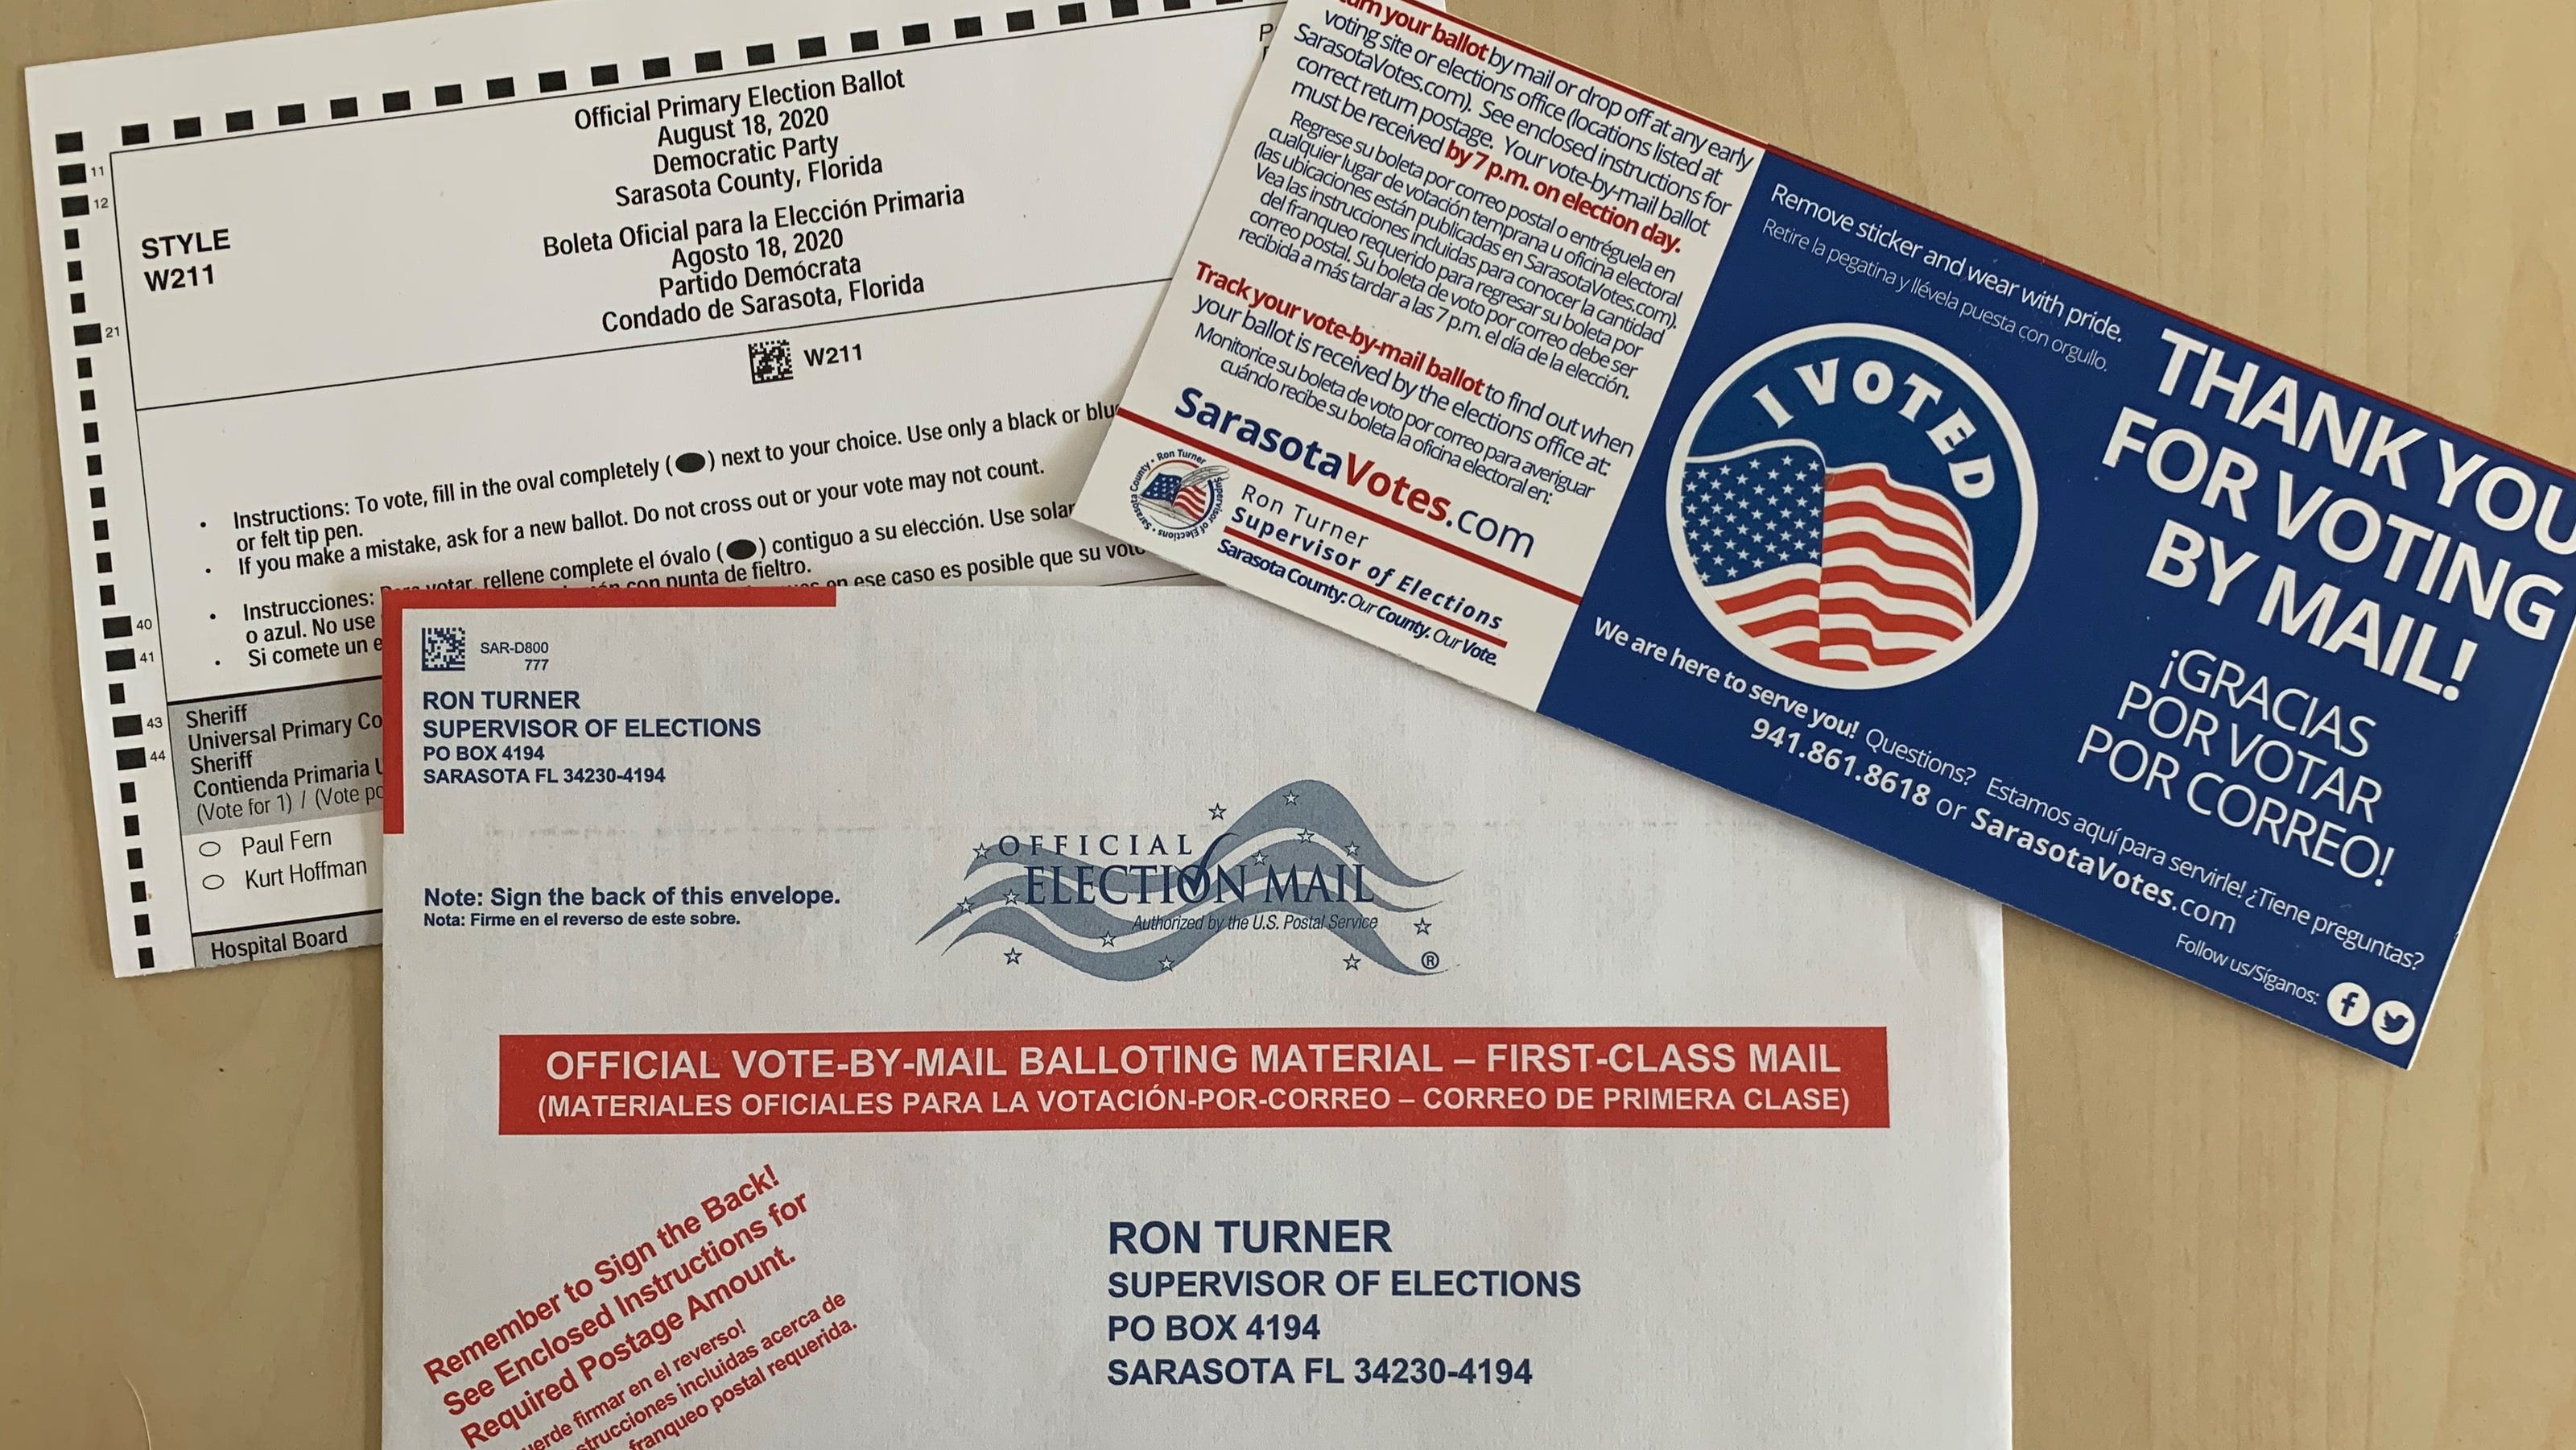 Florida elections officials urge voters to return mail ballots quickly